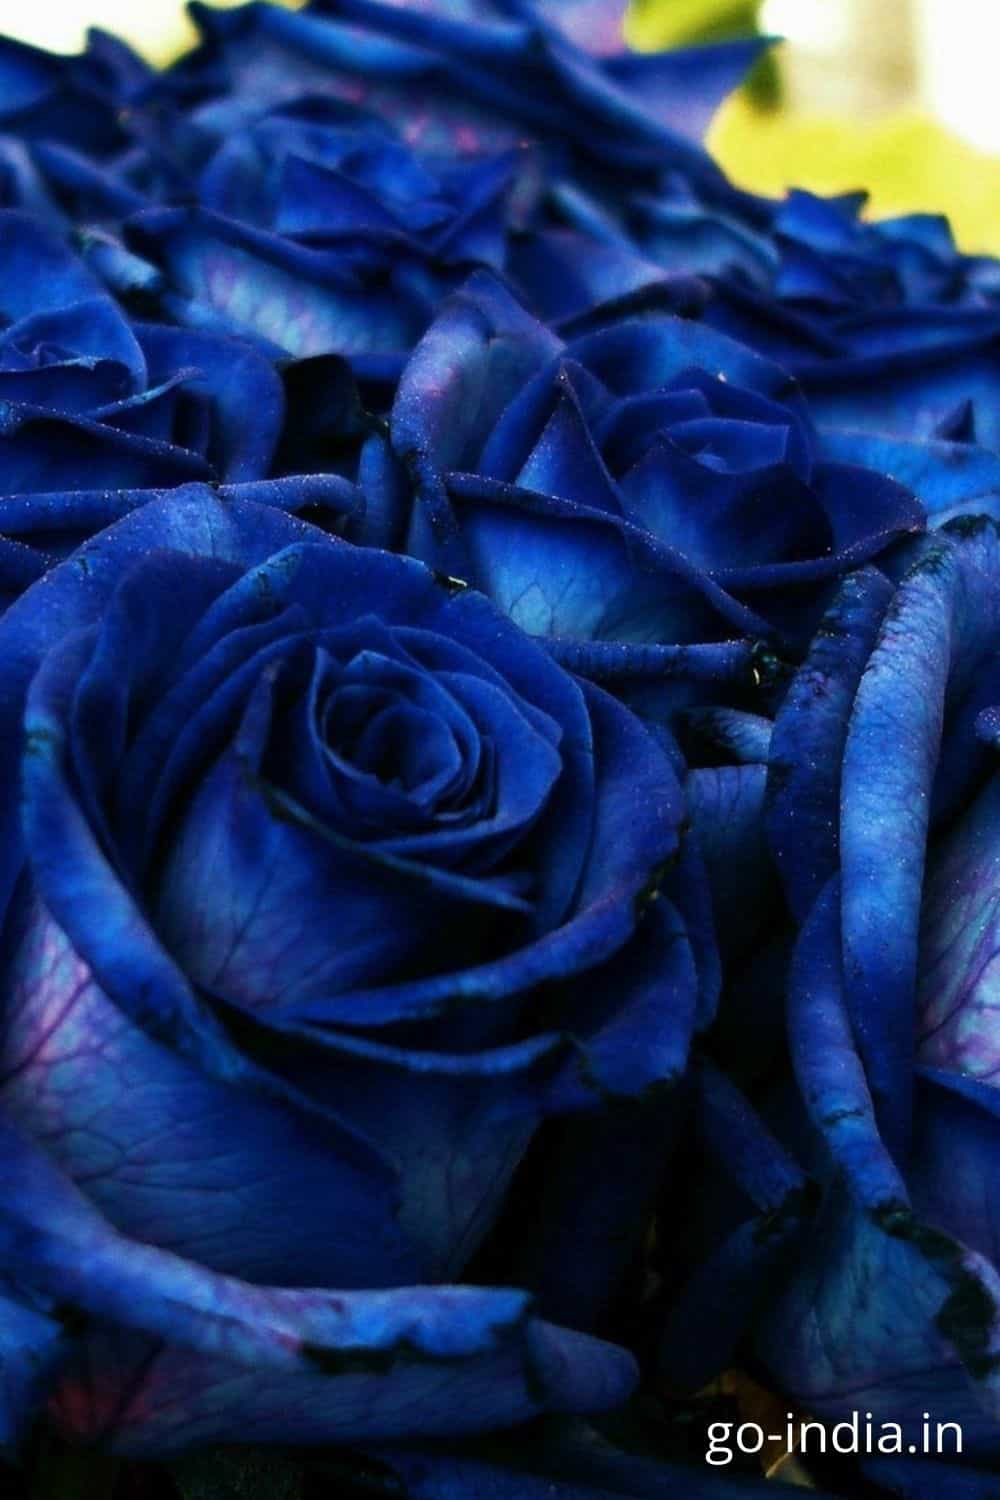 150+ Best Blue Rose Wallpaper, Images and Photos : For a Perfect Romantic Bond